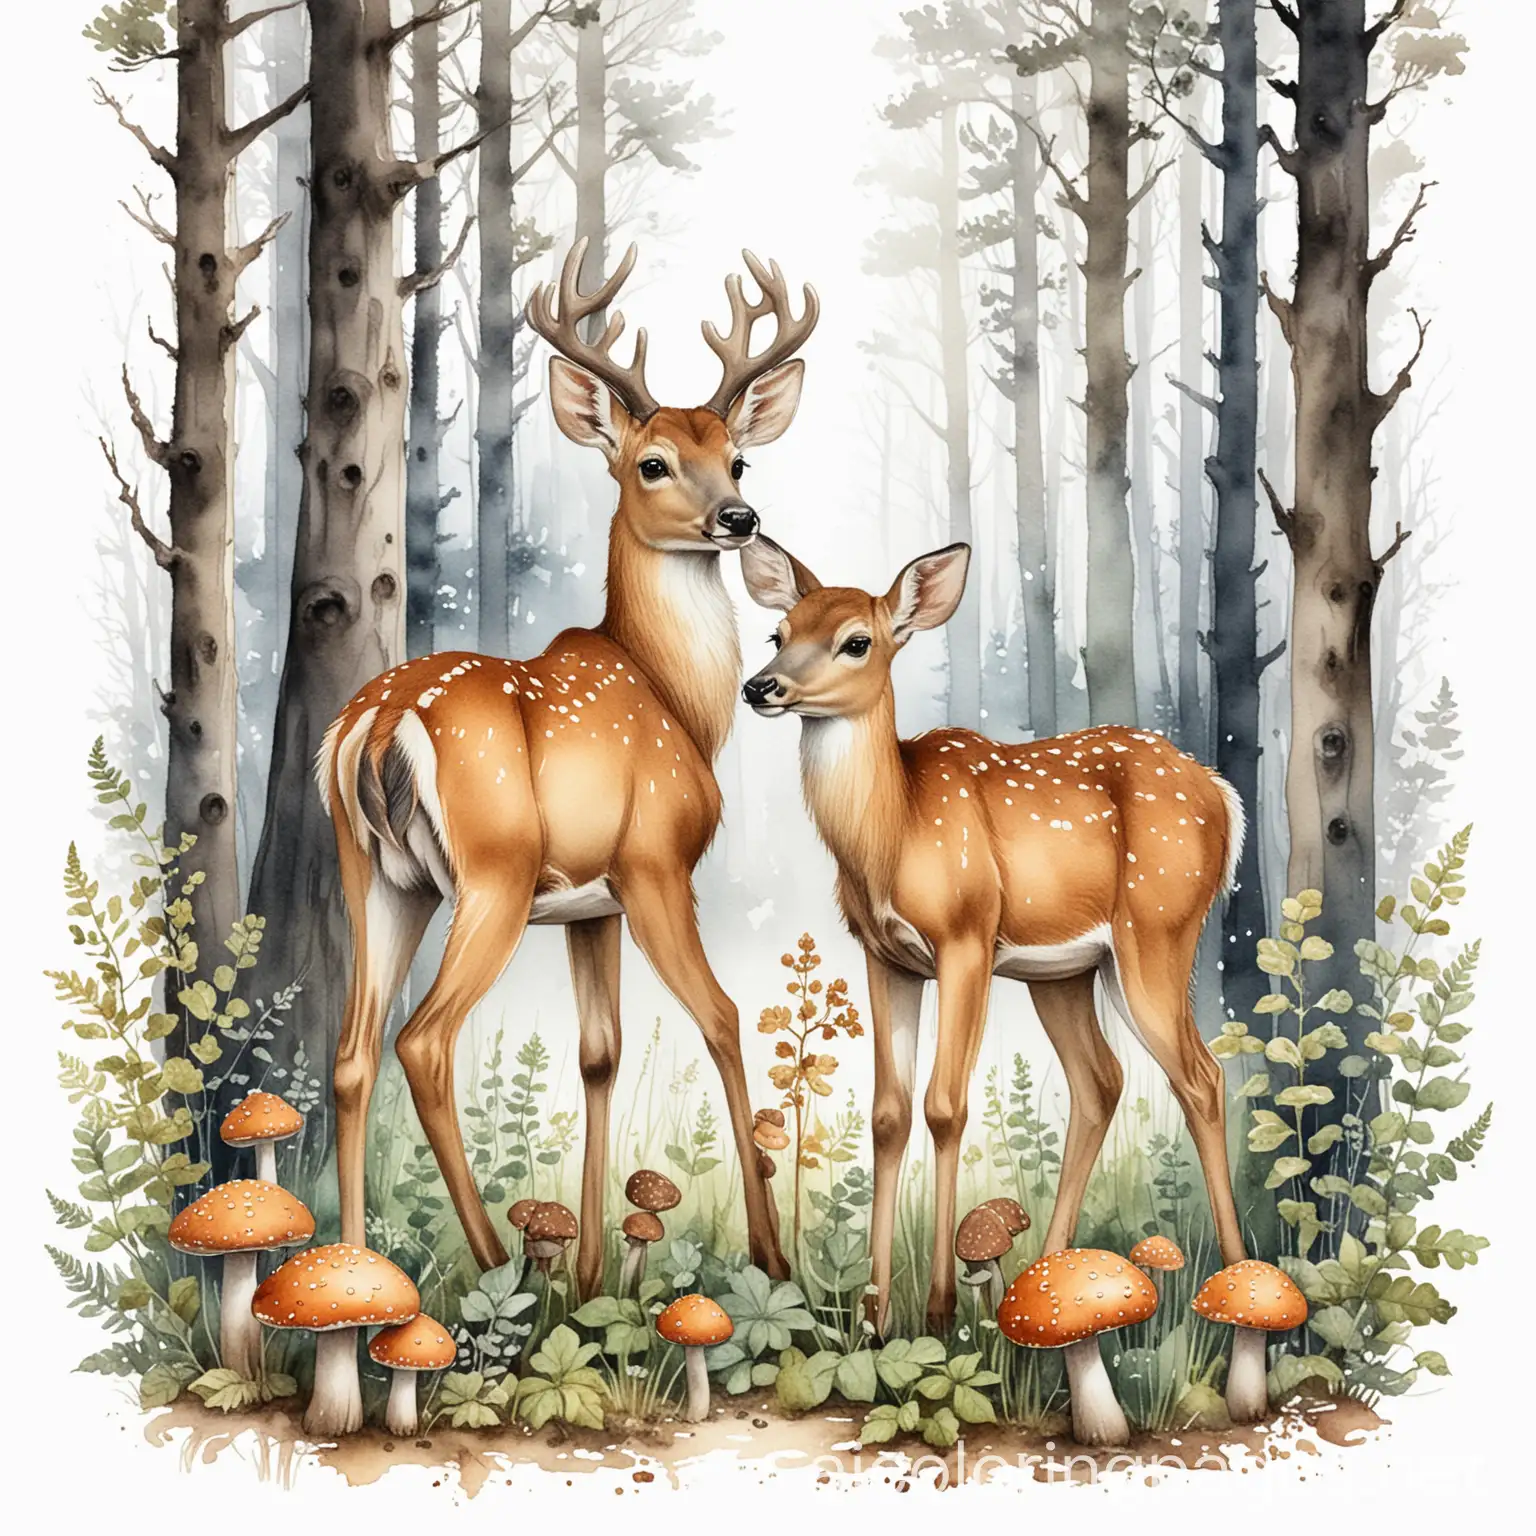 Vintage forest Deer and Fawn with small mushrooms Watercolour Illustration, Coloring Page, black and white, line art, white background, Simplicity, Ample White Space. The background of the coloring page is plain white to make it easy for young children to color within the lines. The outlines of all the subjects are easy to distinguish, making it simple for kids to color without too much difficulty